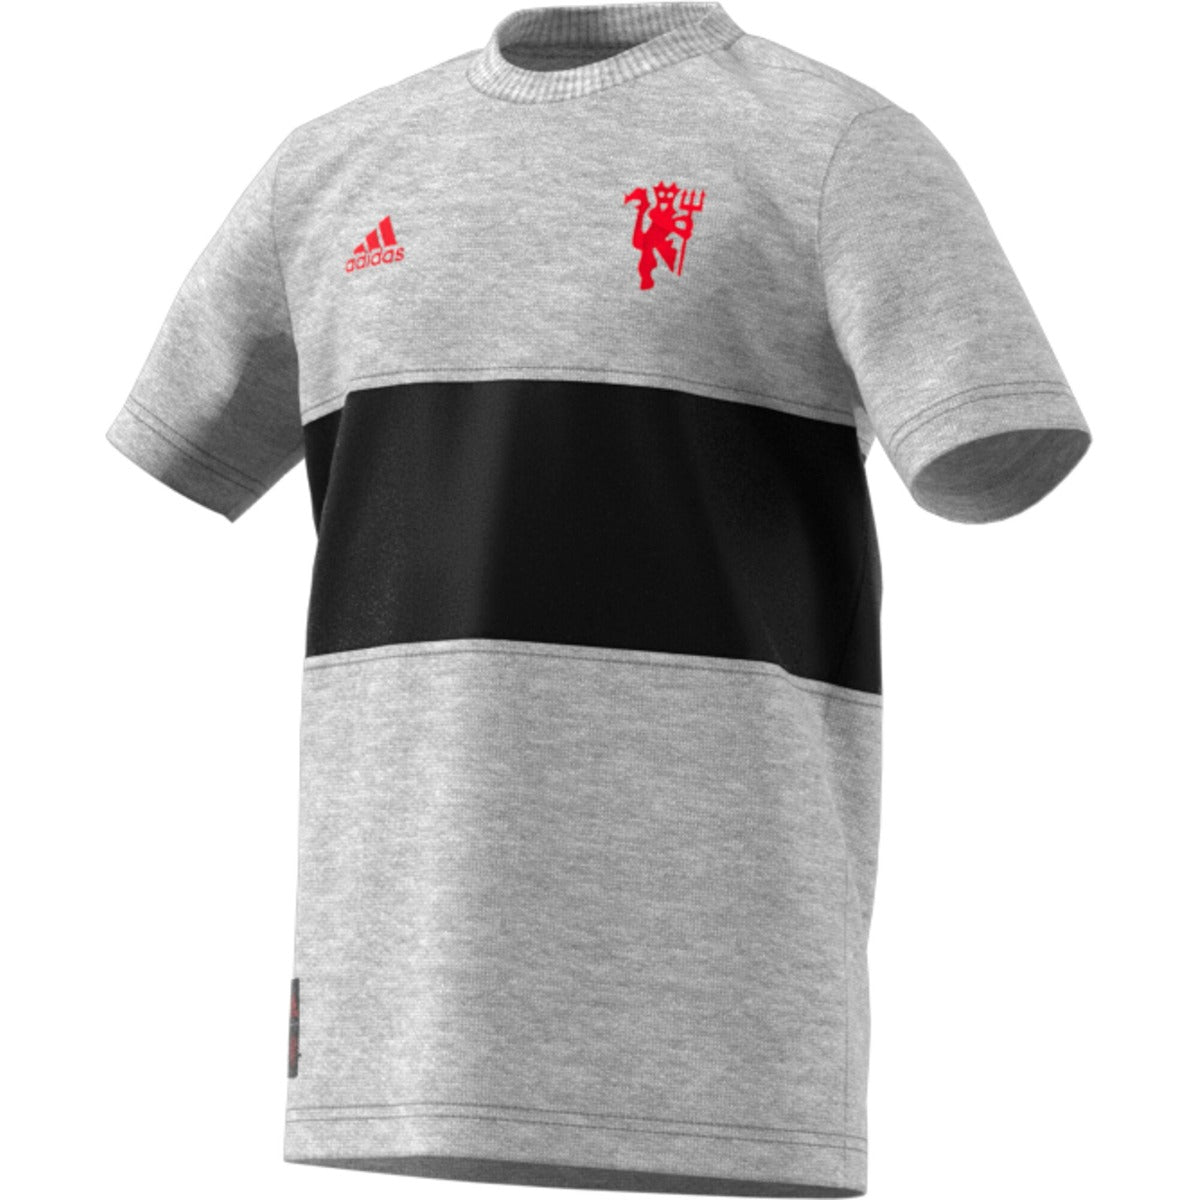 adidas 2019-20 Manchester United Youth Graphic Tee - Grey-Black